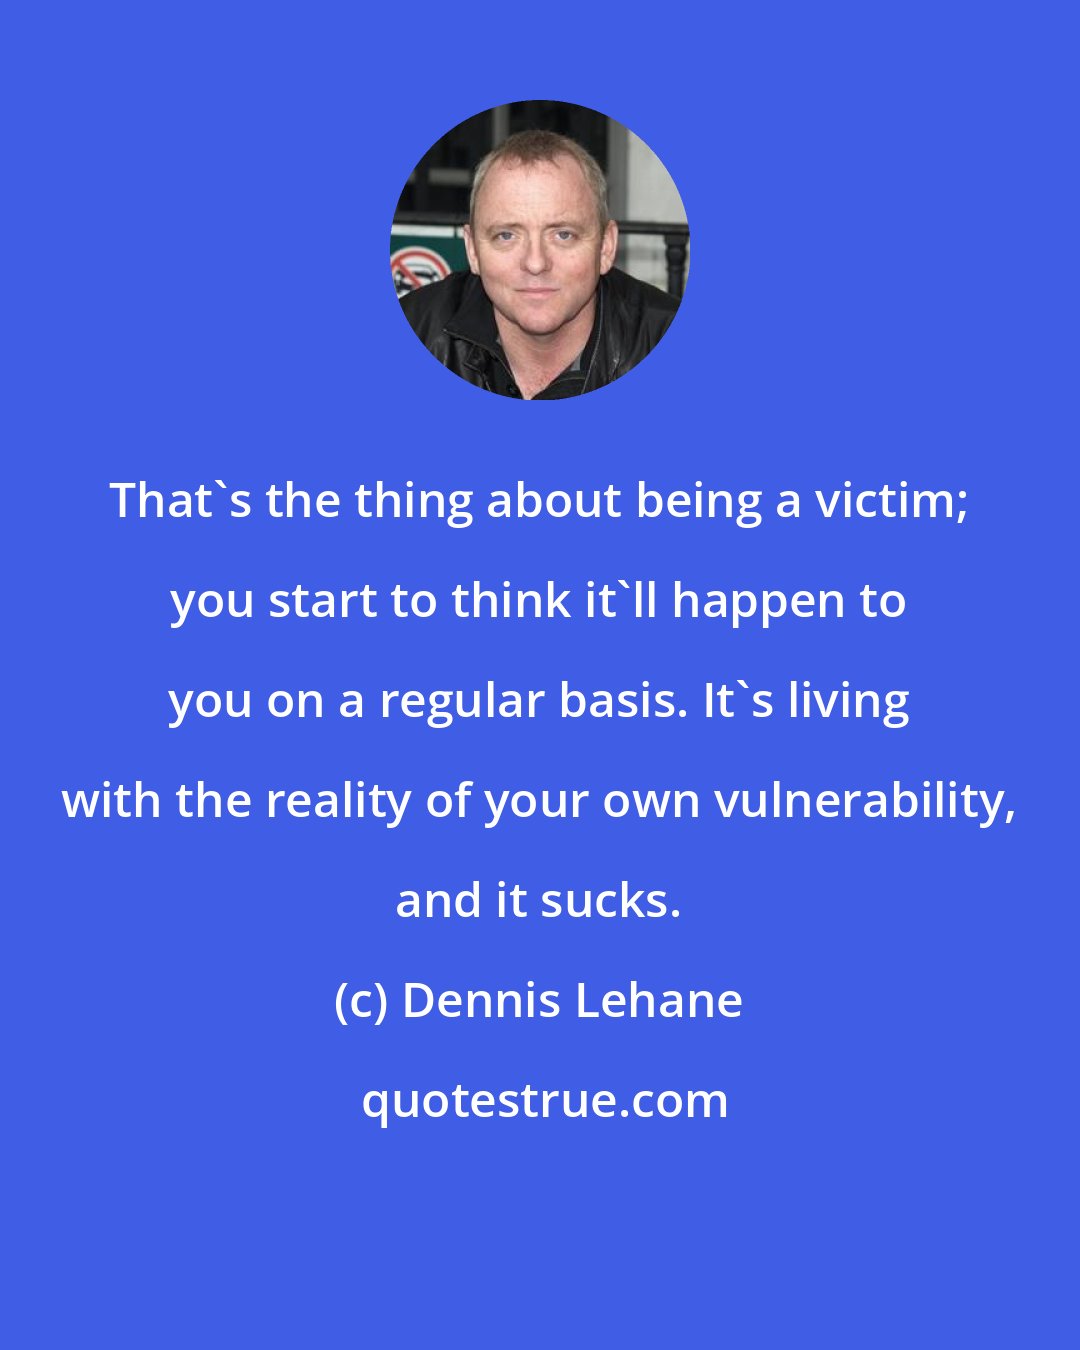 Dennis Lehane: That's the thing about being a victim; you start to think it'll happen to you on a regular basis. It's living with the reality of your own vulnerability, and it sucks.